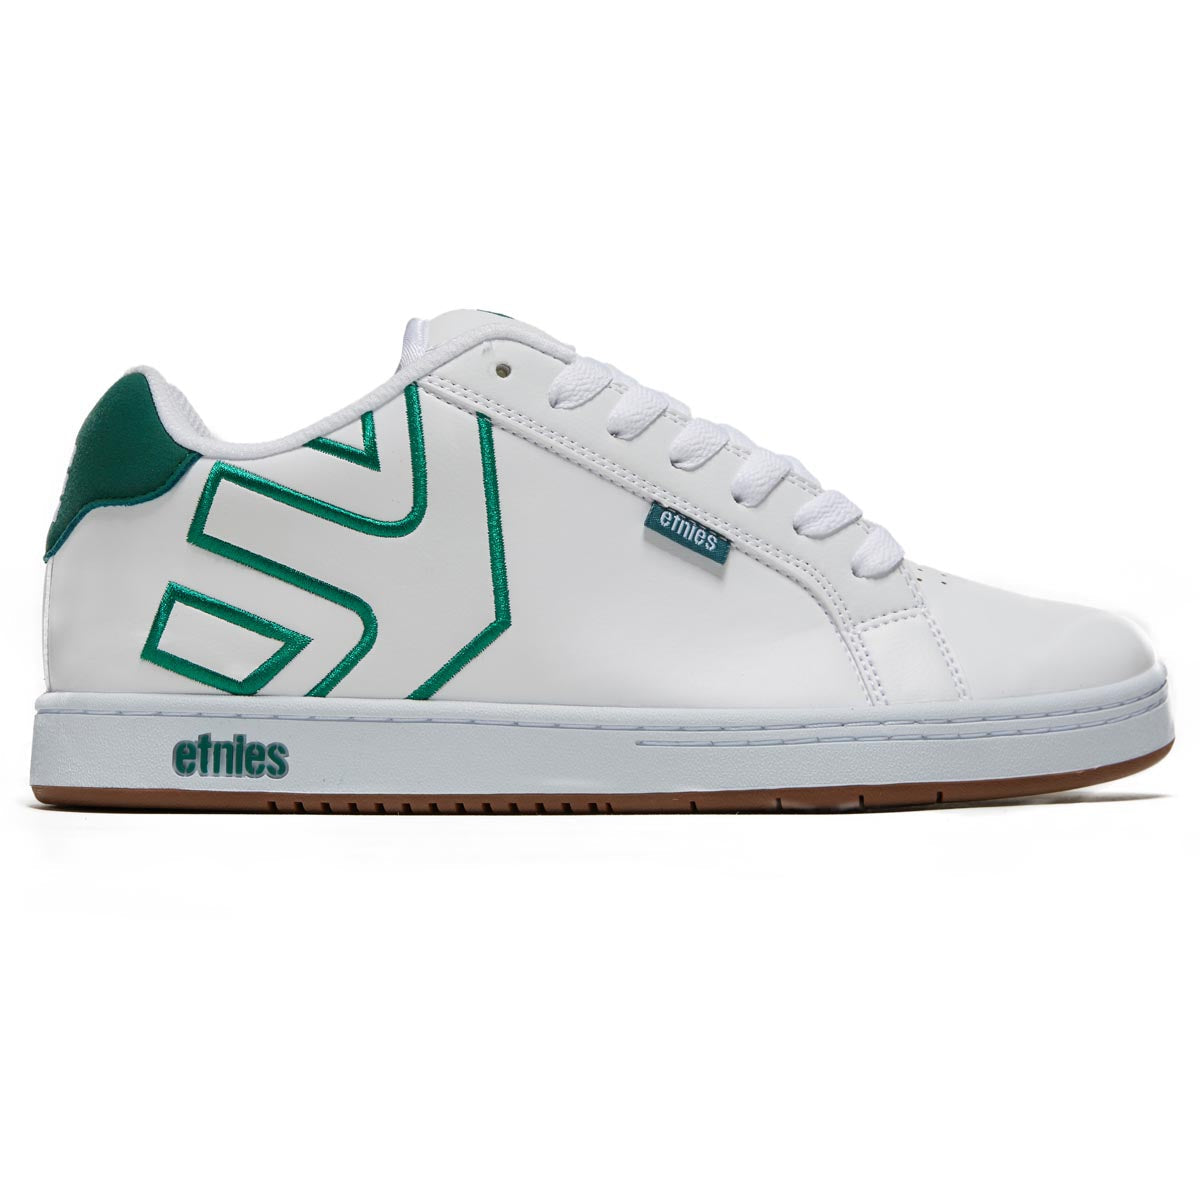 Etnies Fader Shoes - White/Green image 1